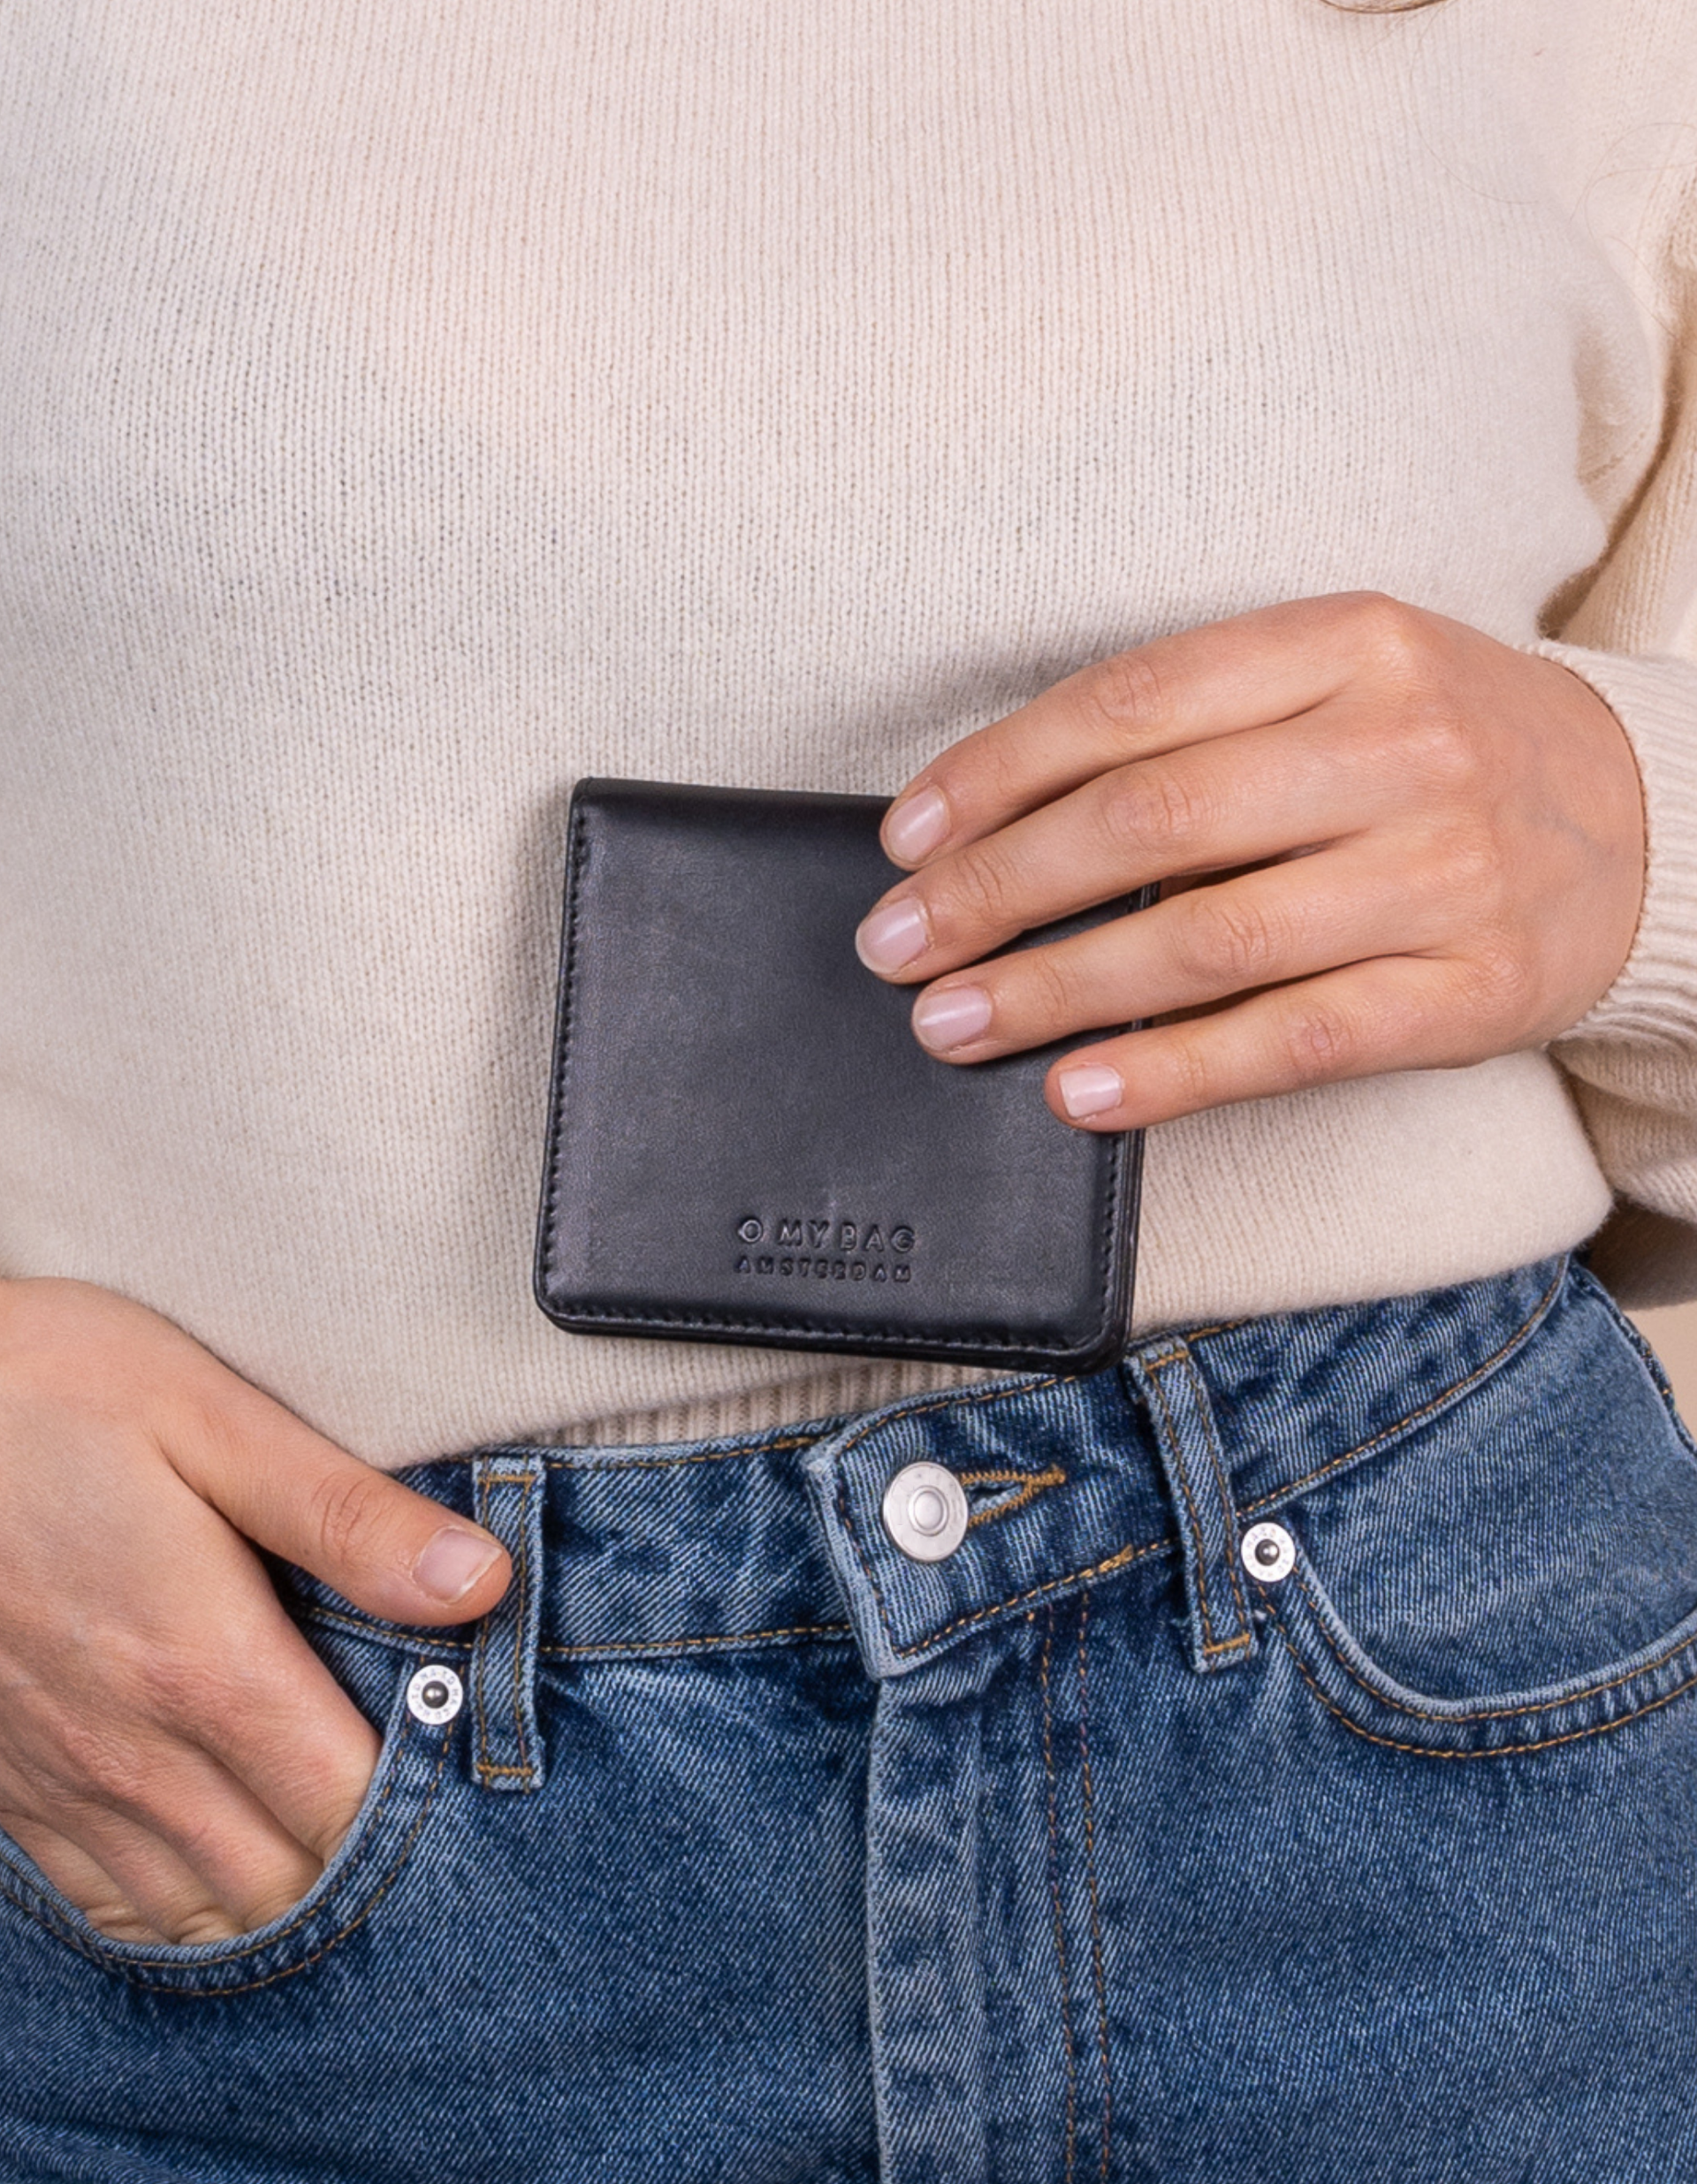 Alex fold over wallet in black classic leather. Model product image.